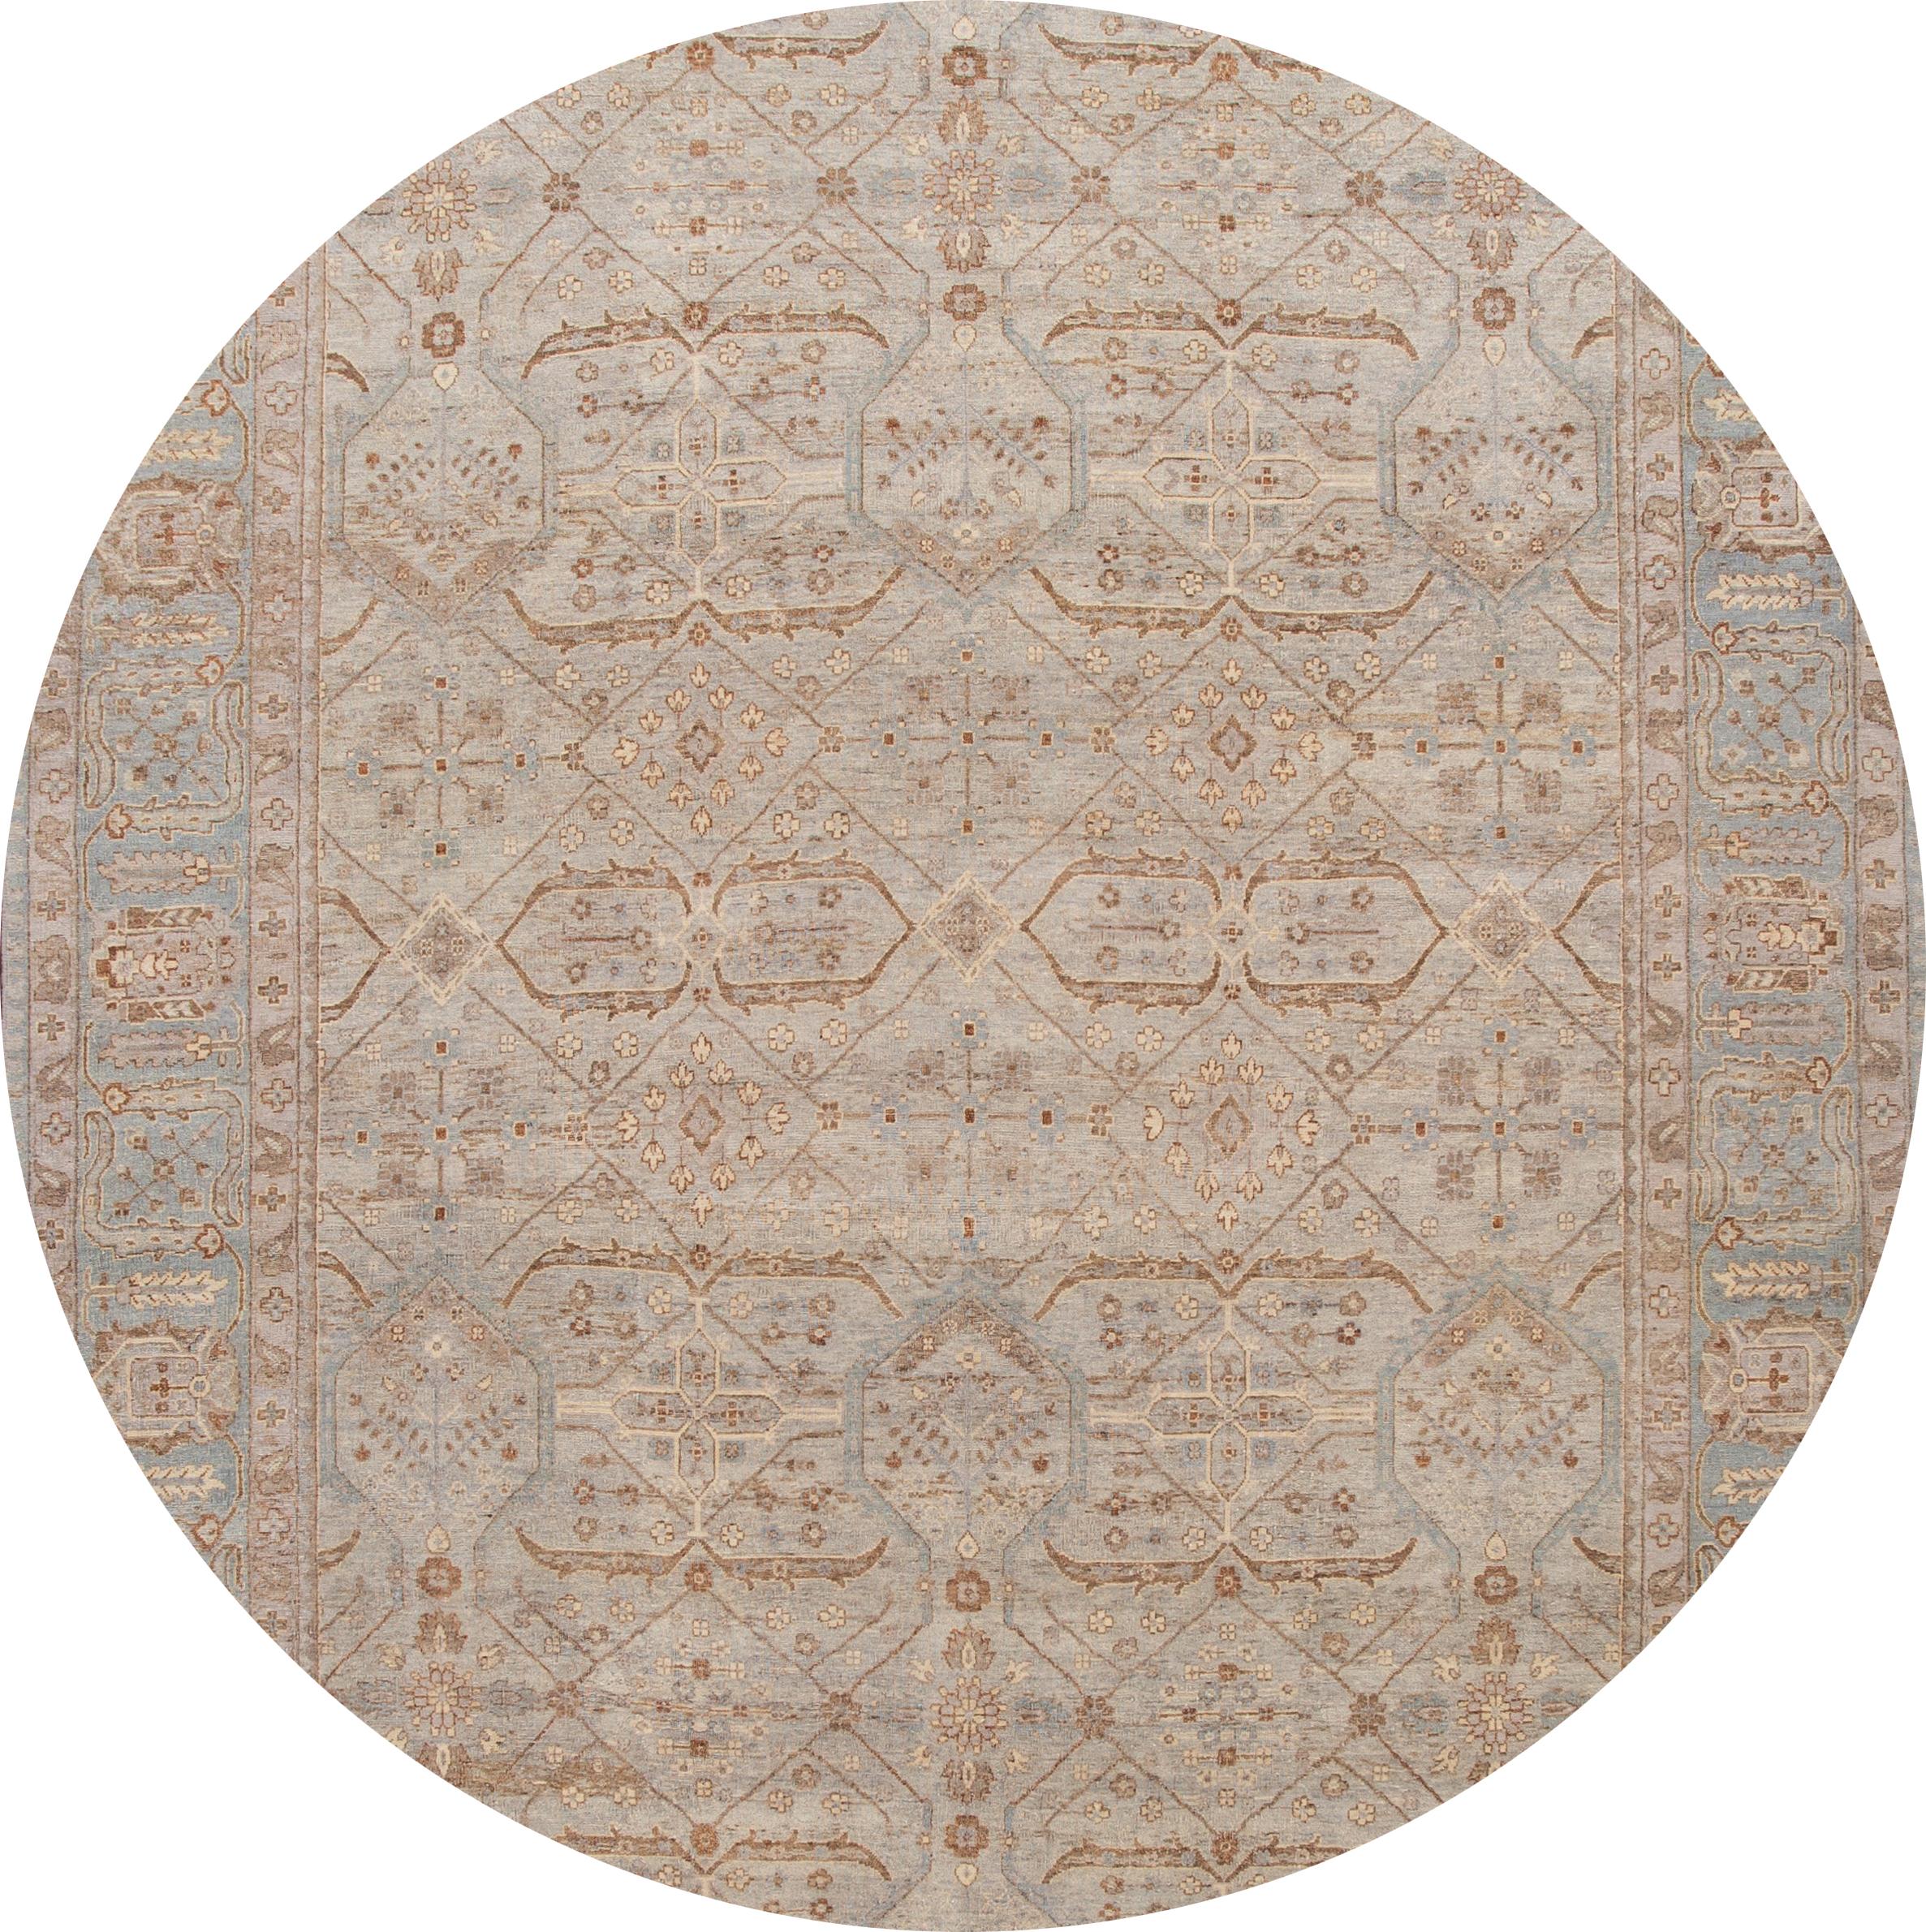 Beautiful modern hand knotted Indian wool rug with a gray field, beige, brown, and blue accents with an all-over geometric design.

This rug measures: 9'8